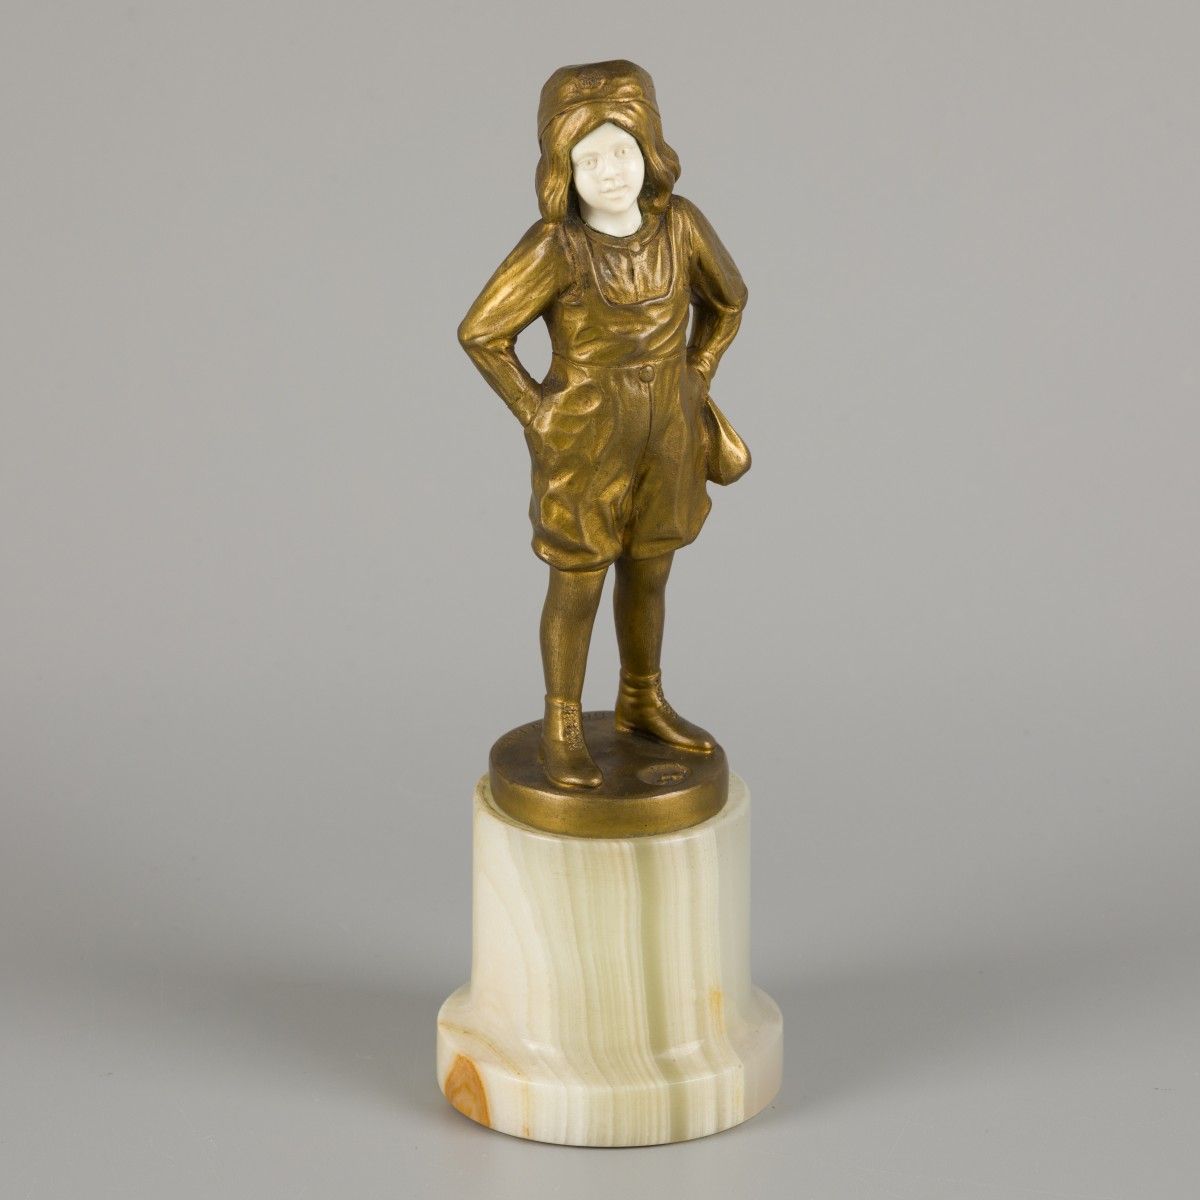 B. Grundmann (XIX-XX), a bronze statuette of a young boy playing with marbles, G&hellip;